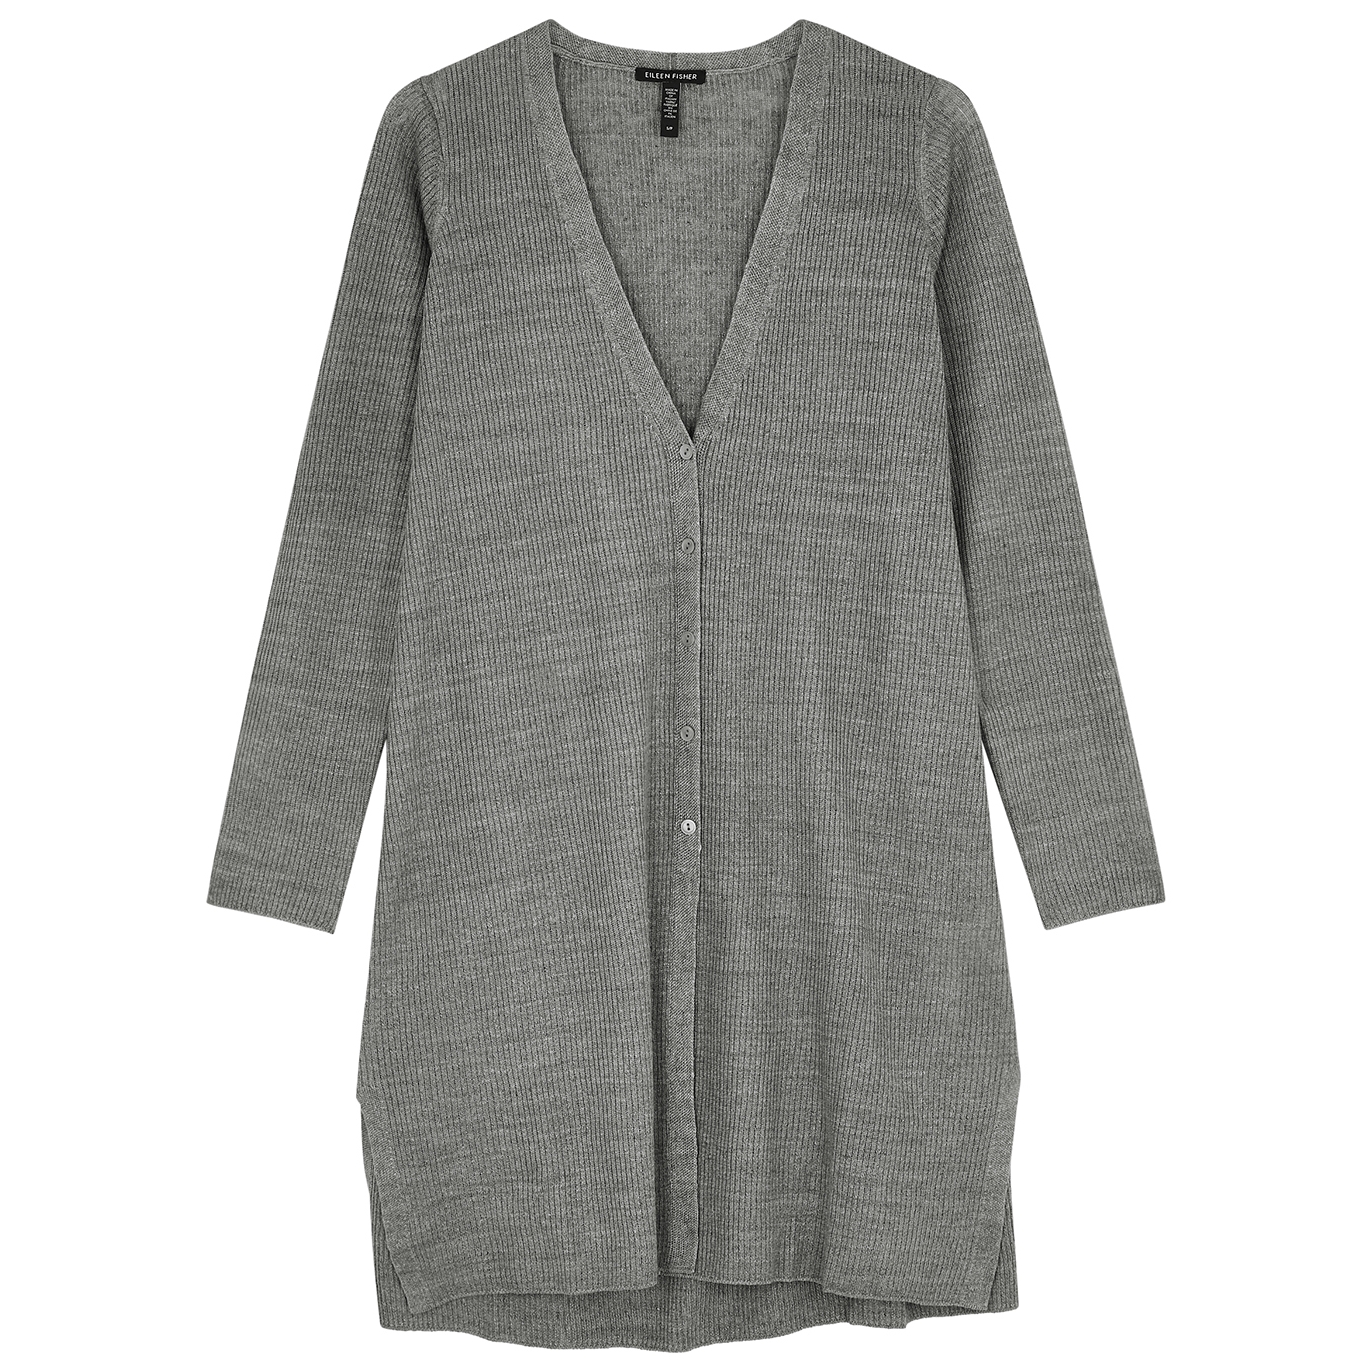 Eileen Fisher Grey Ribbed Linen Cardigan - XS